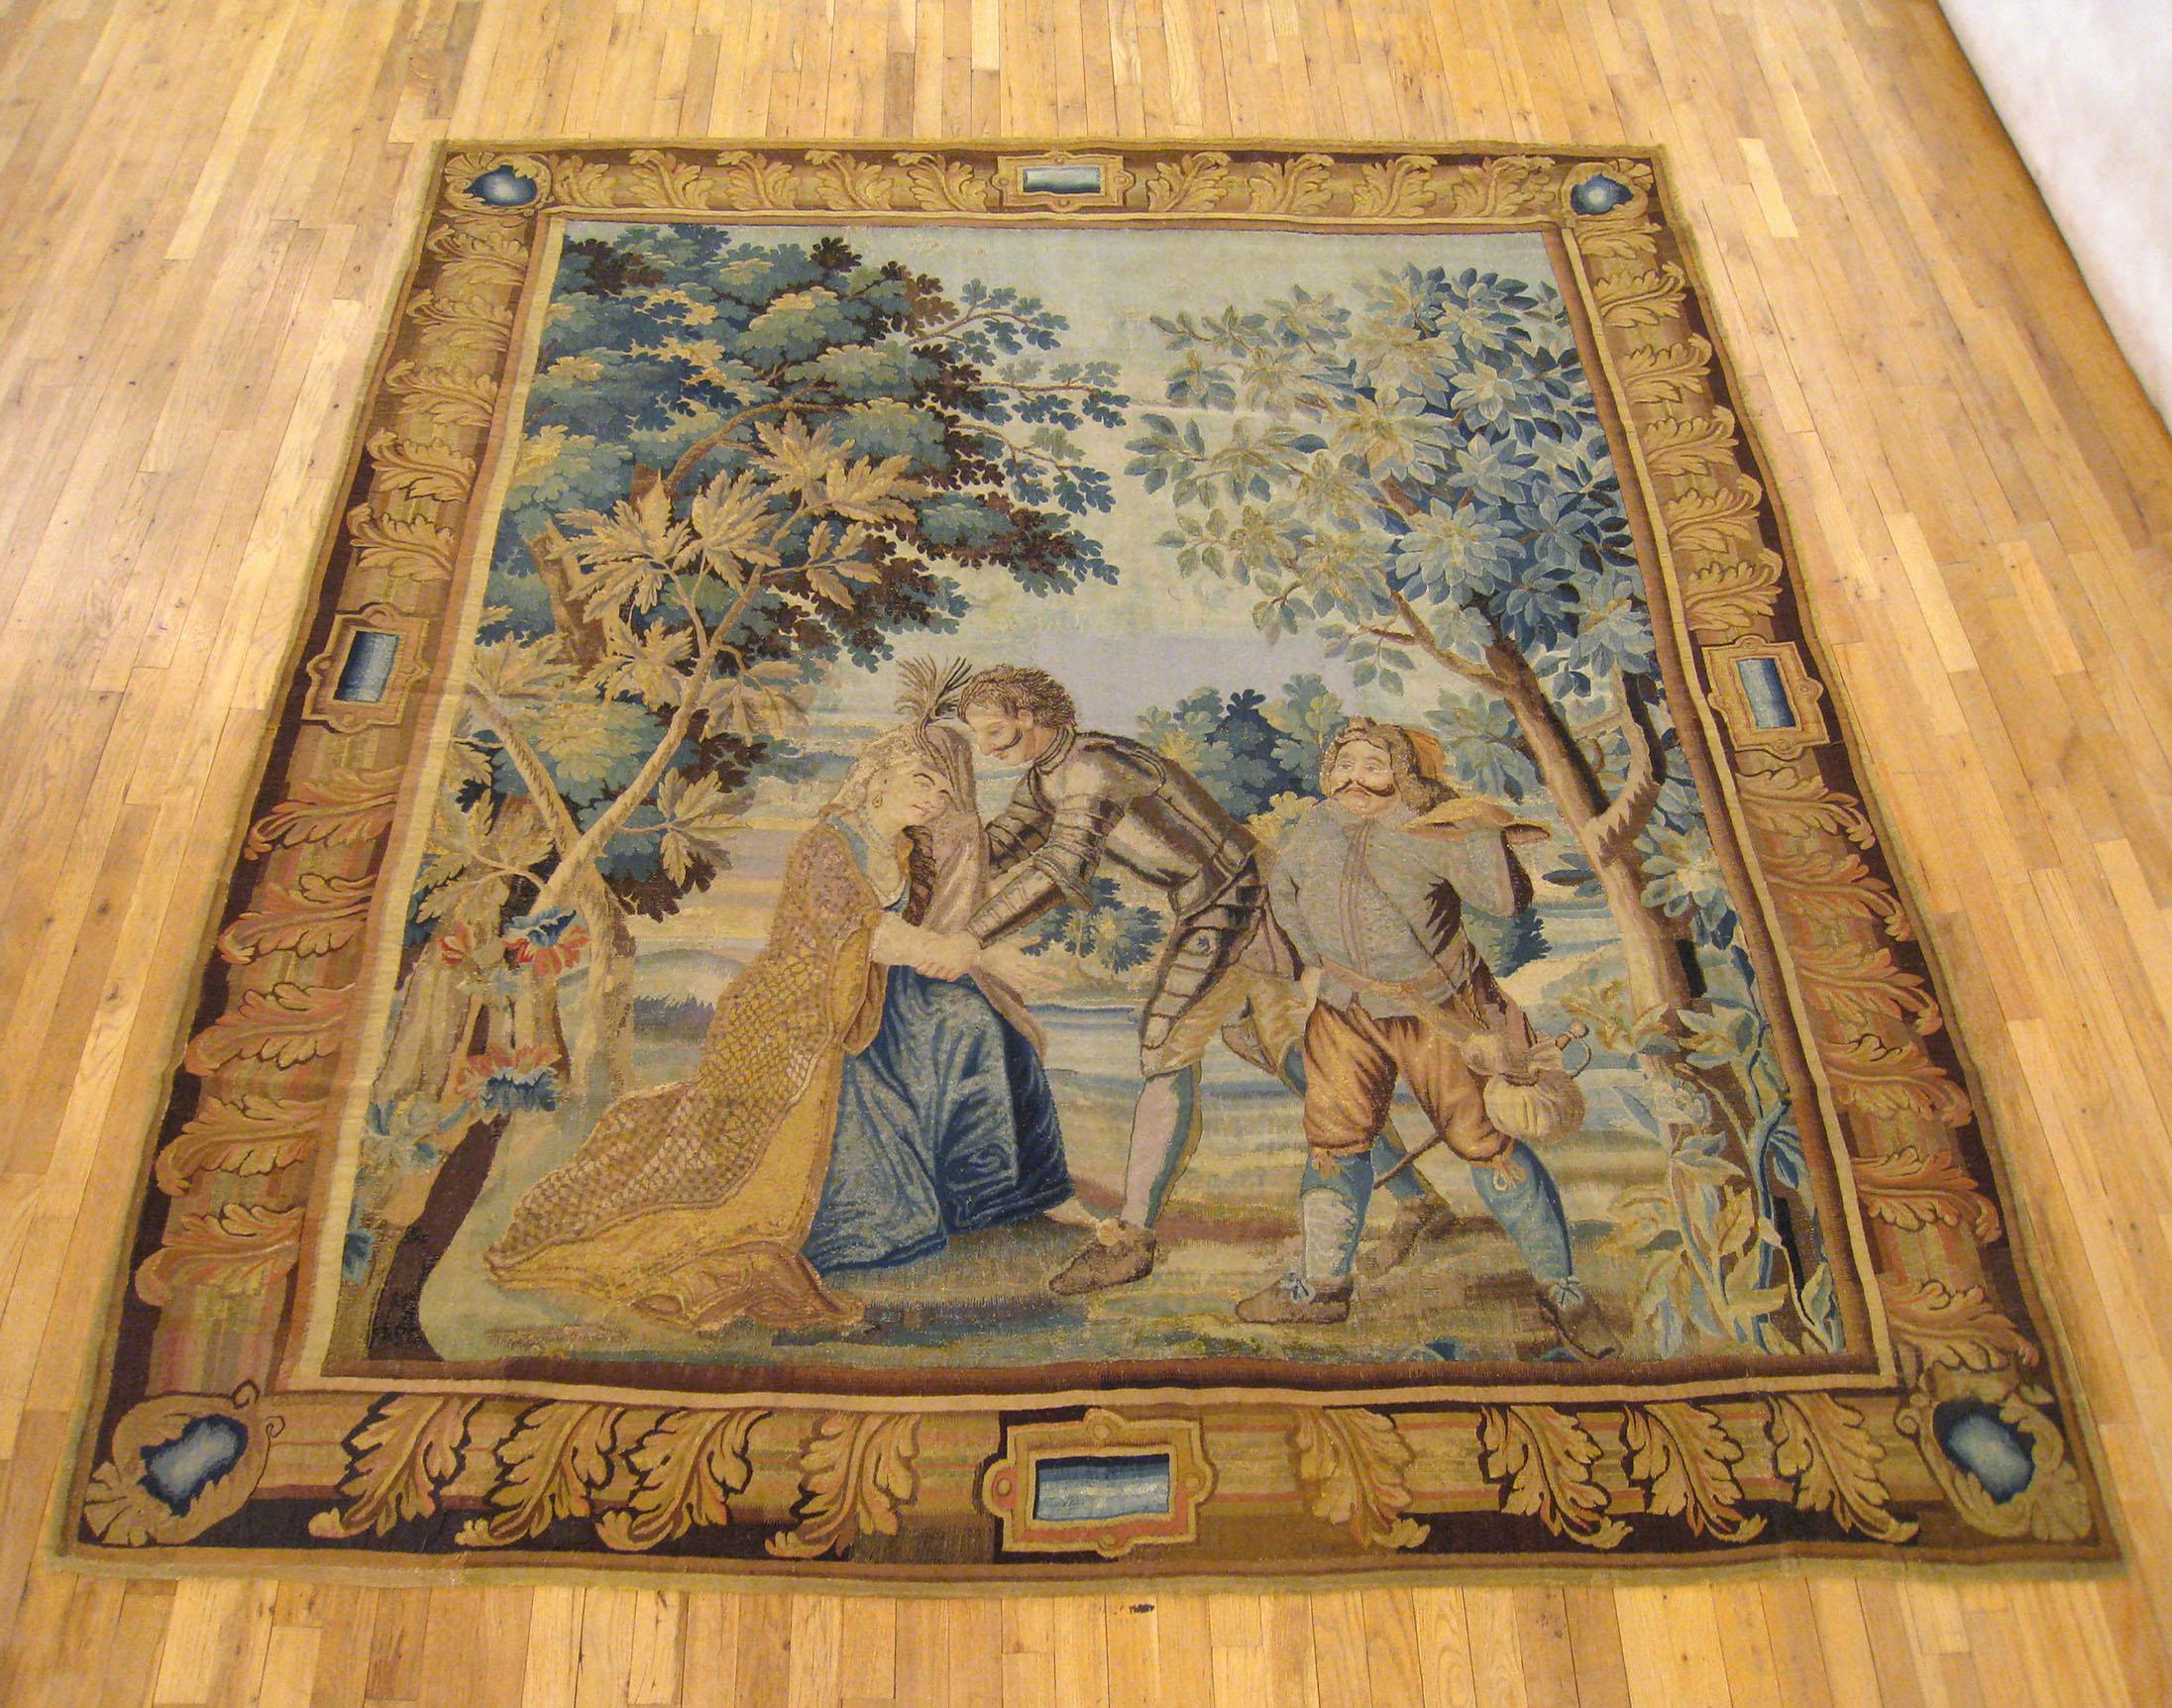 An antique 18th century French Aubusson tapestry, size 8'10